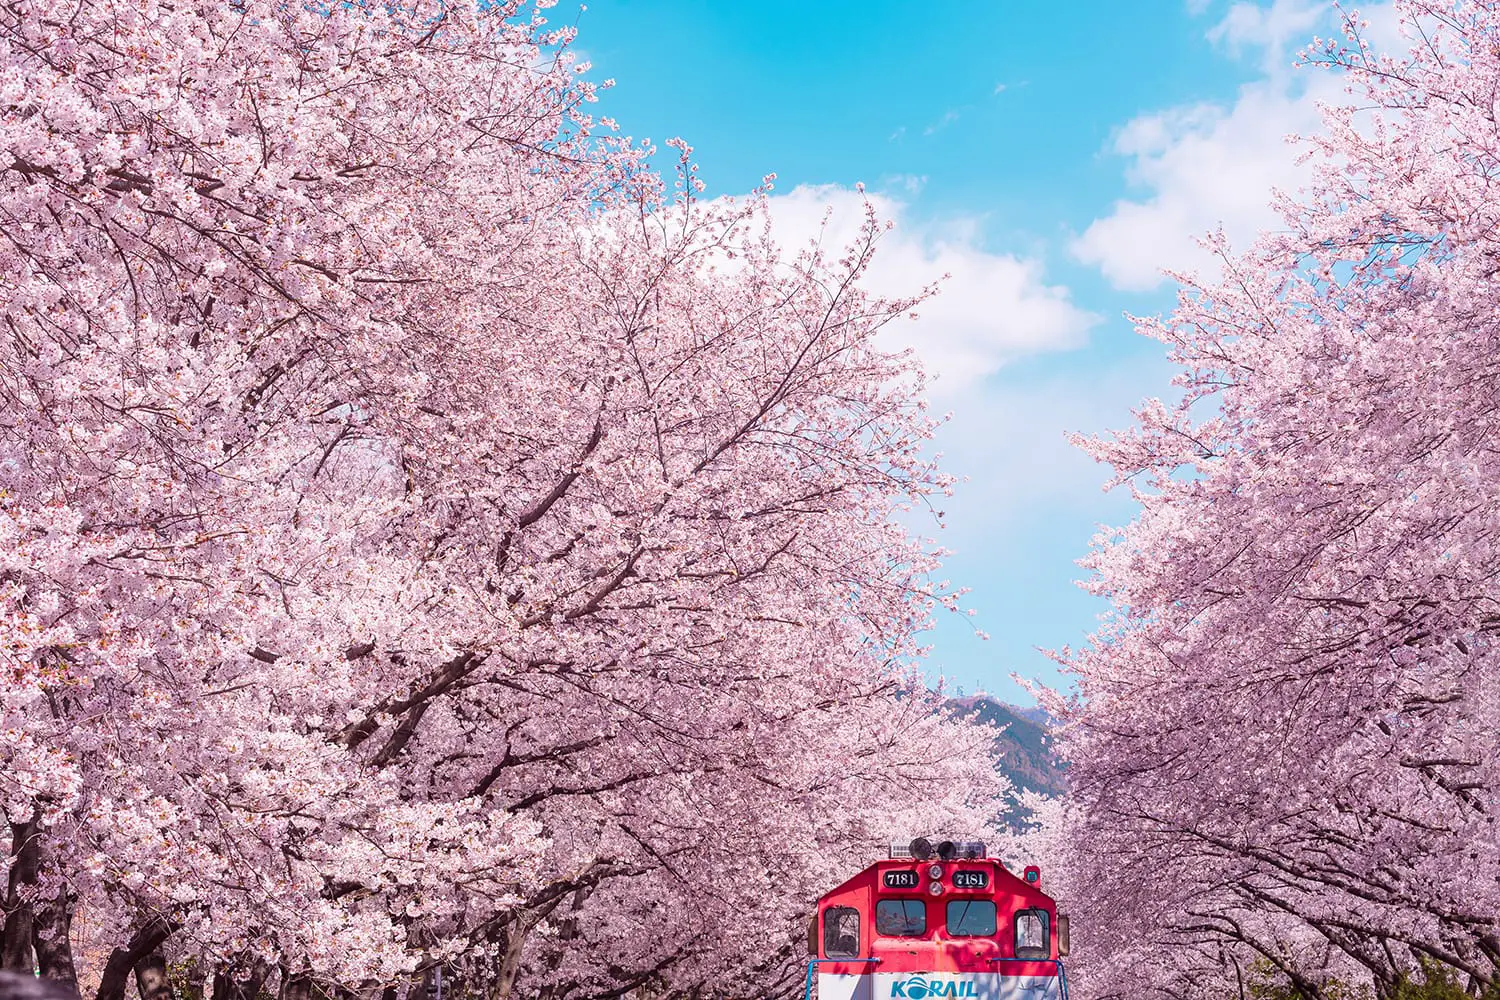 Cherry blossom with train in Jinhae, South Korea